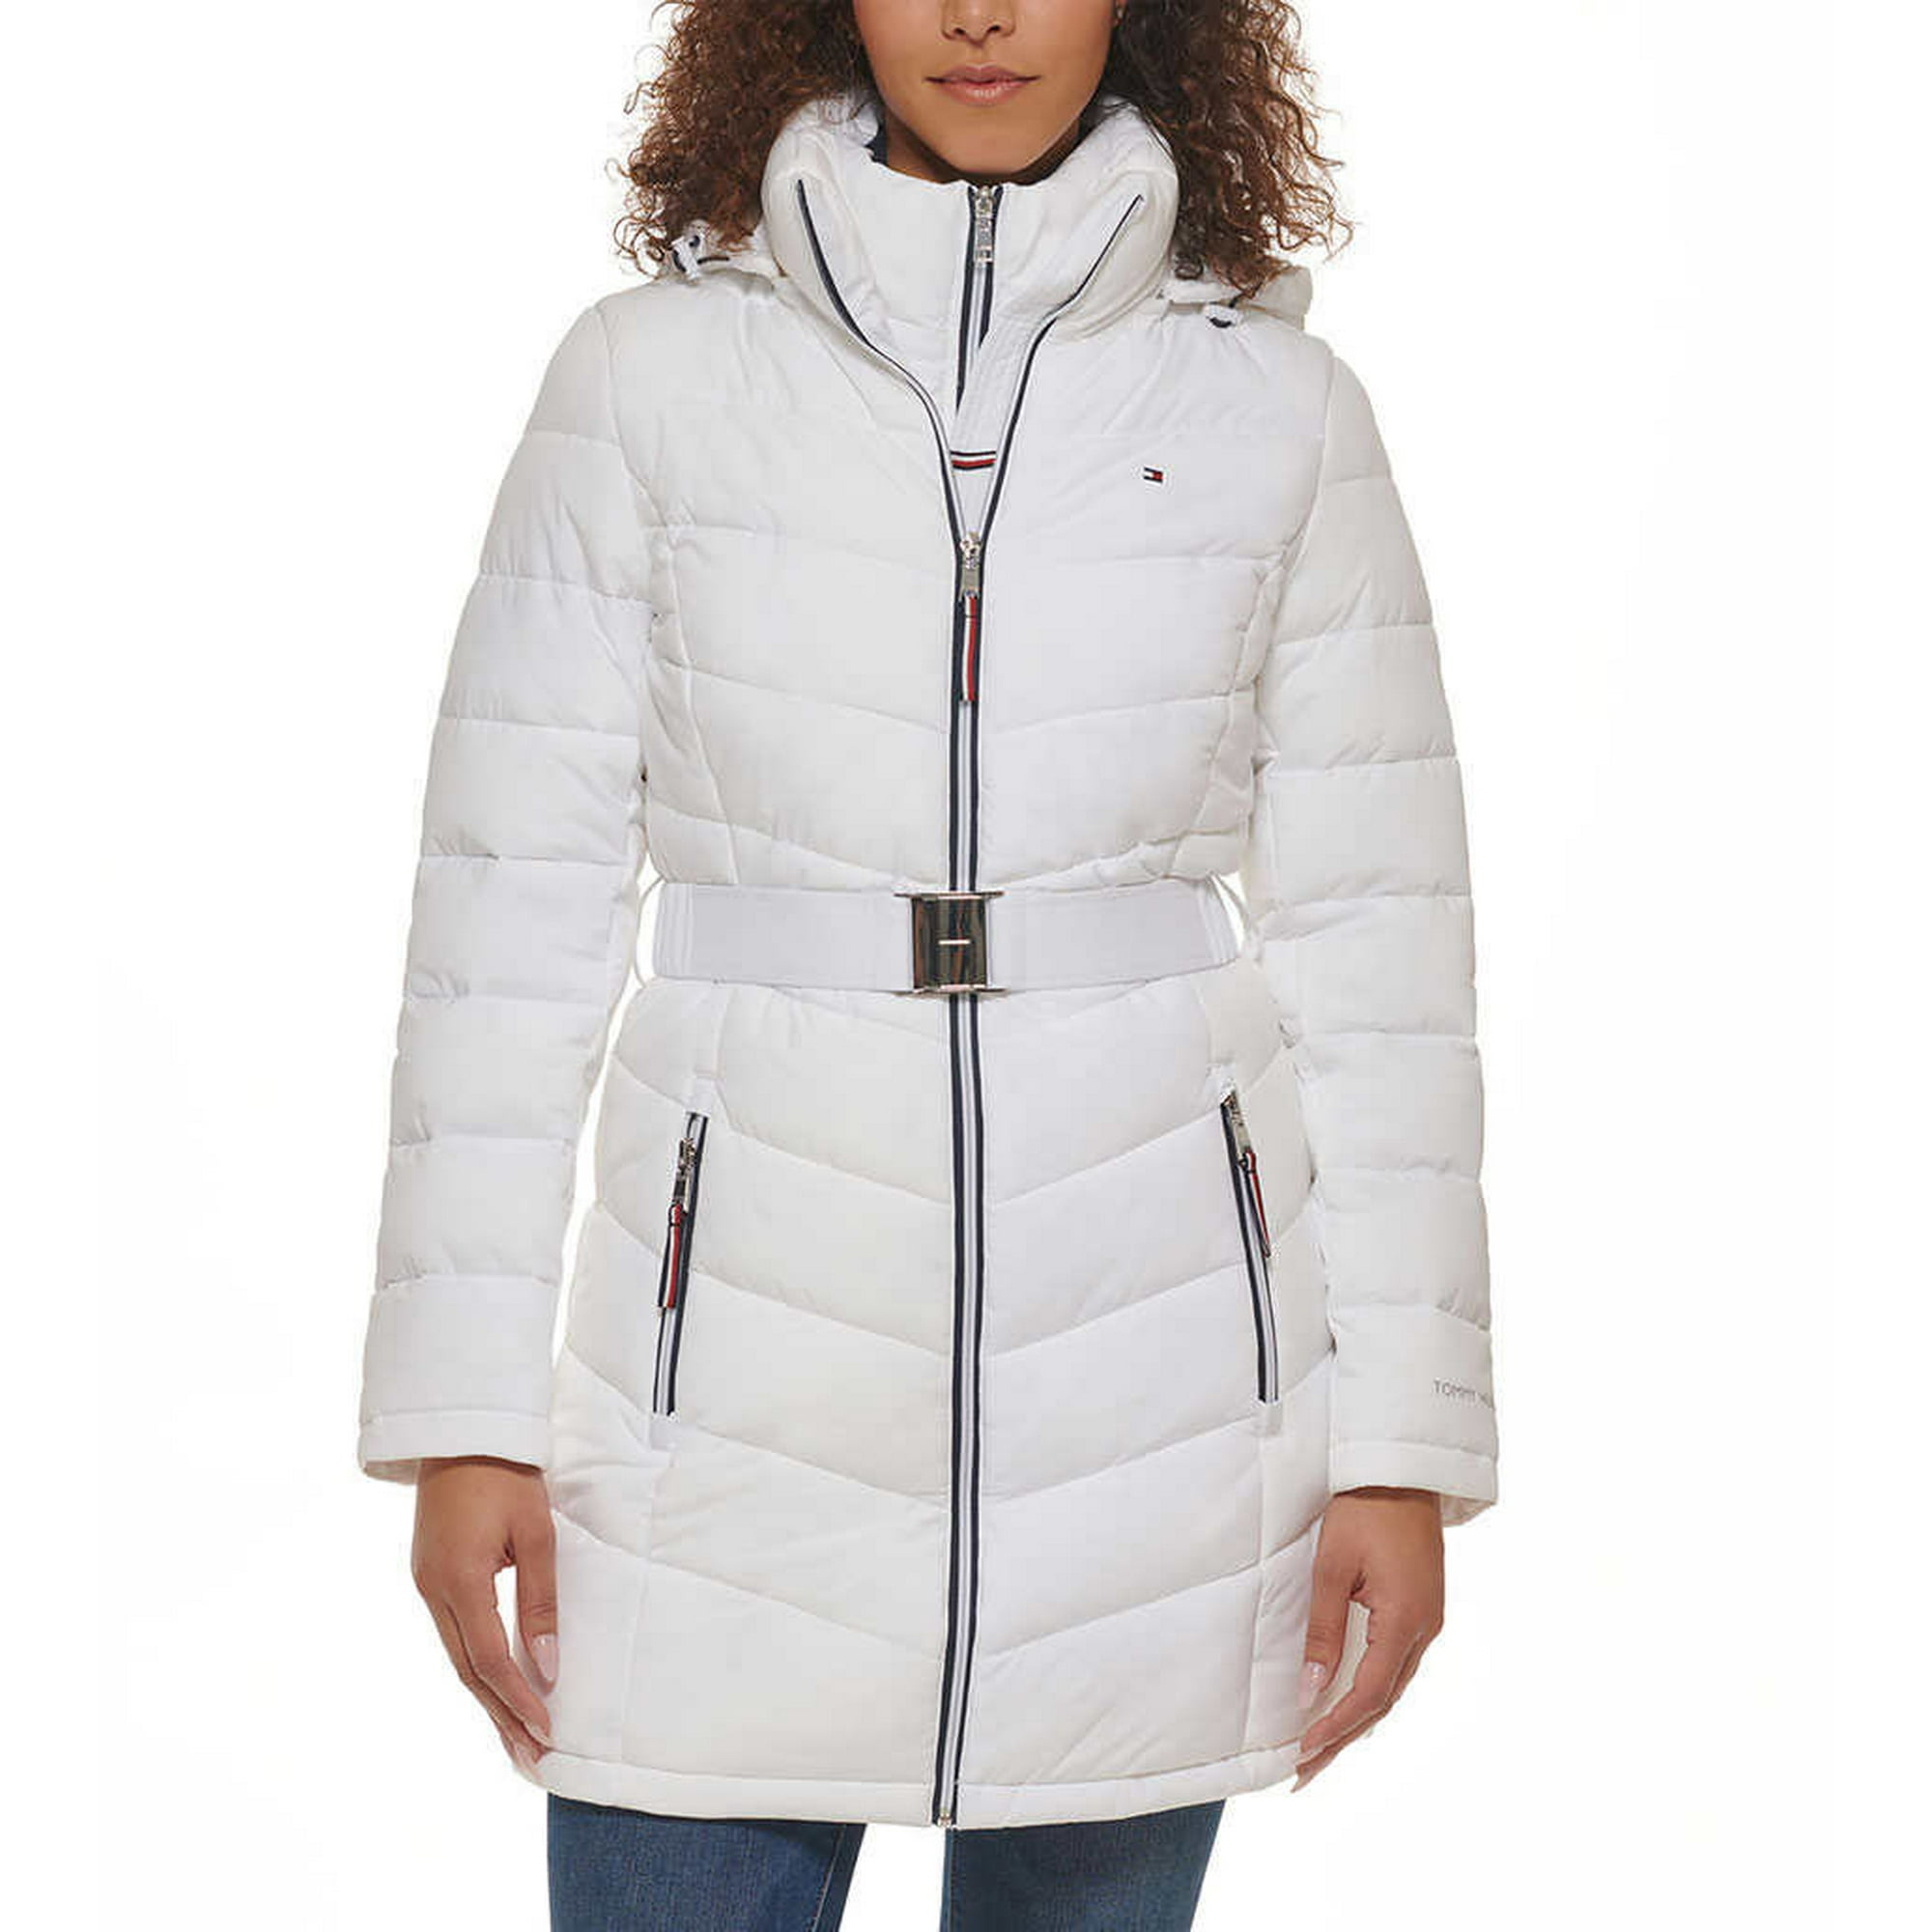 Tommy Hilfiger Belted Puffer Coat Jacket with Hood, White, XL -